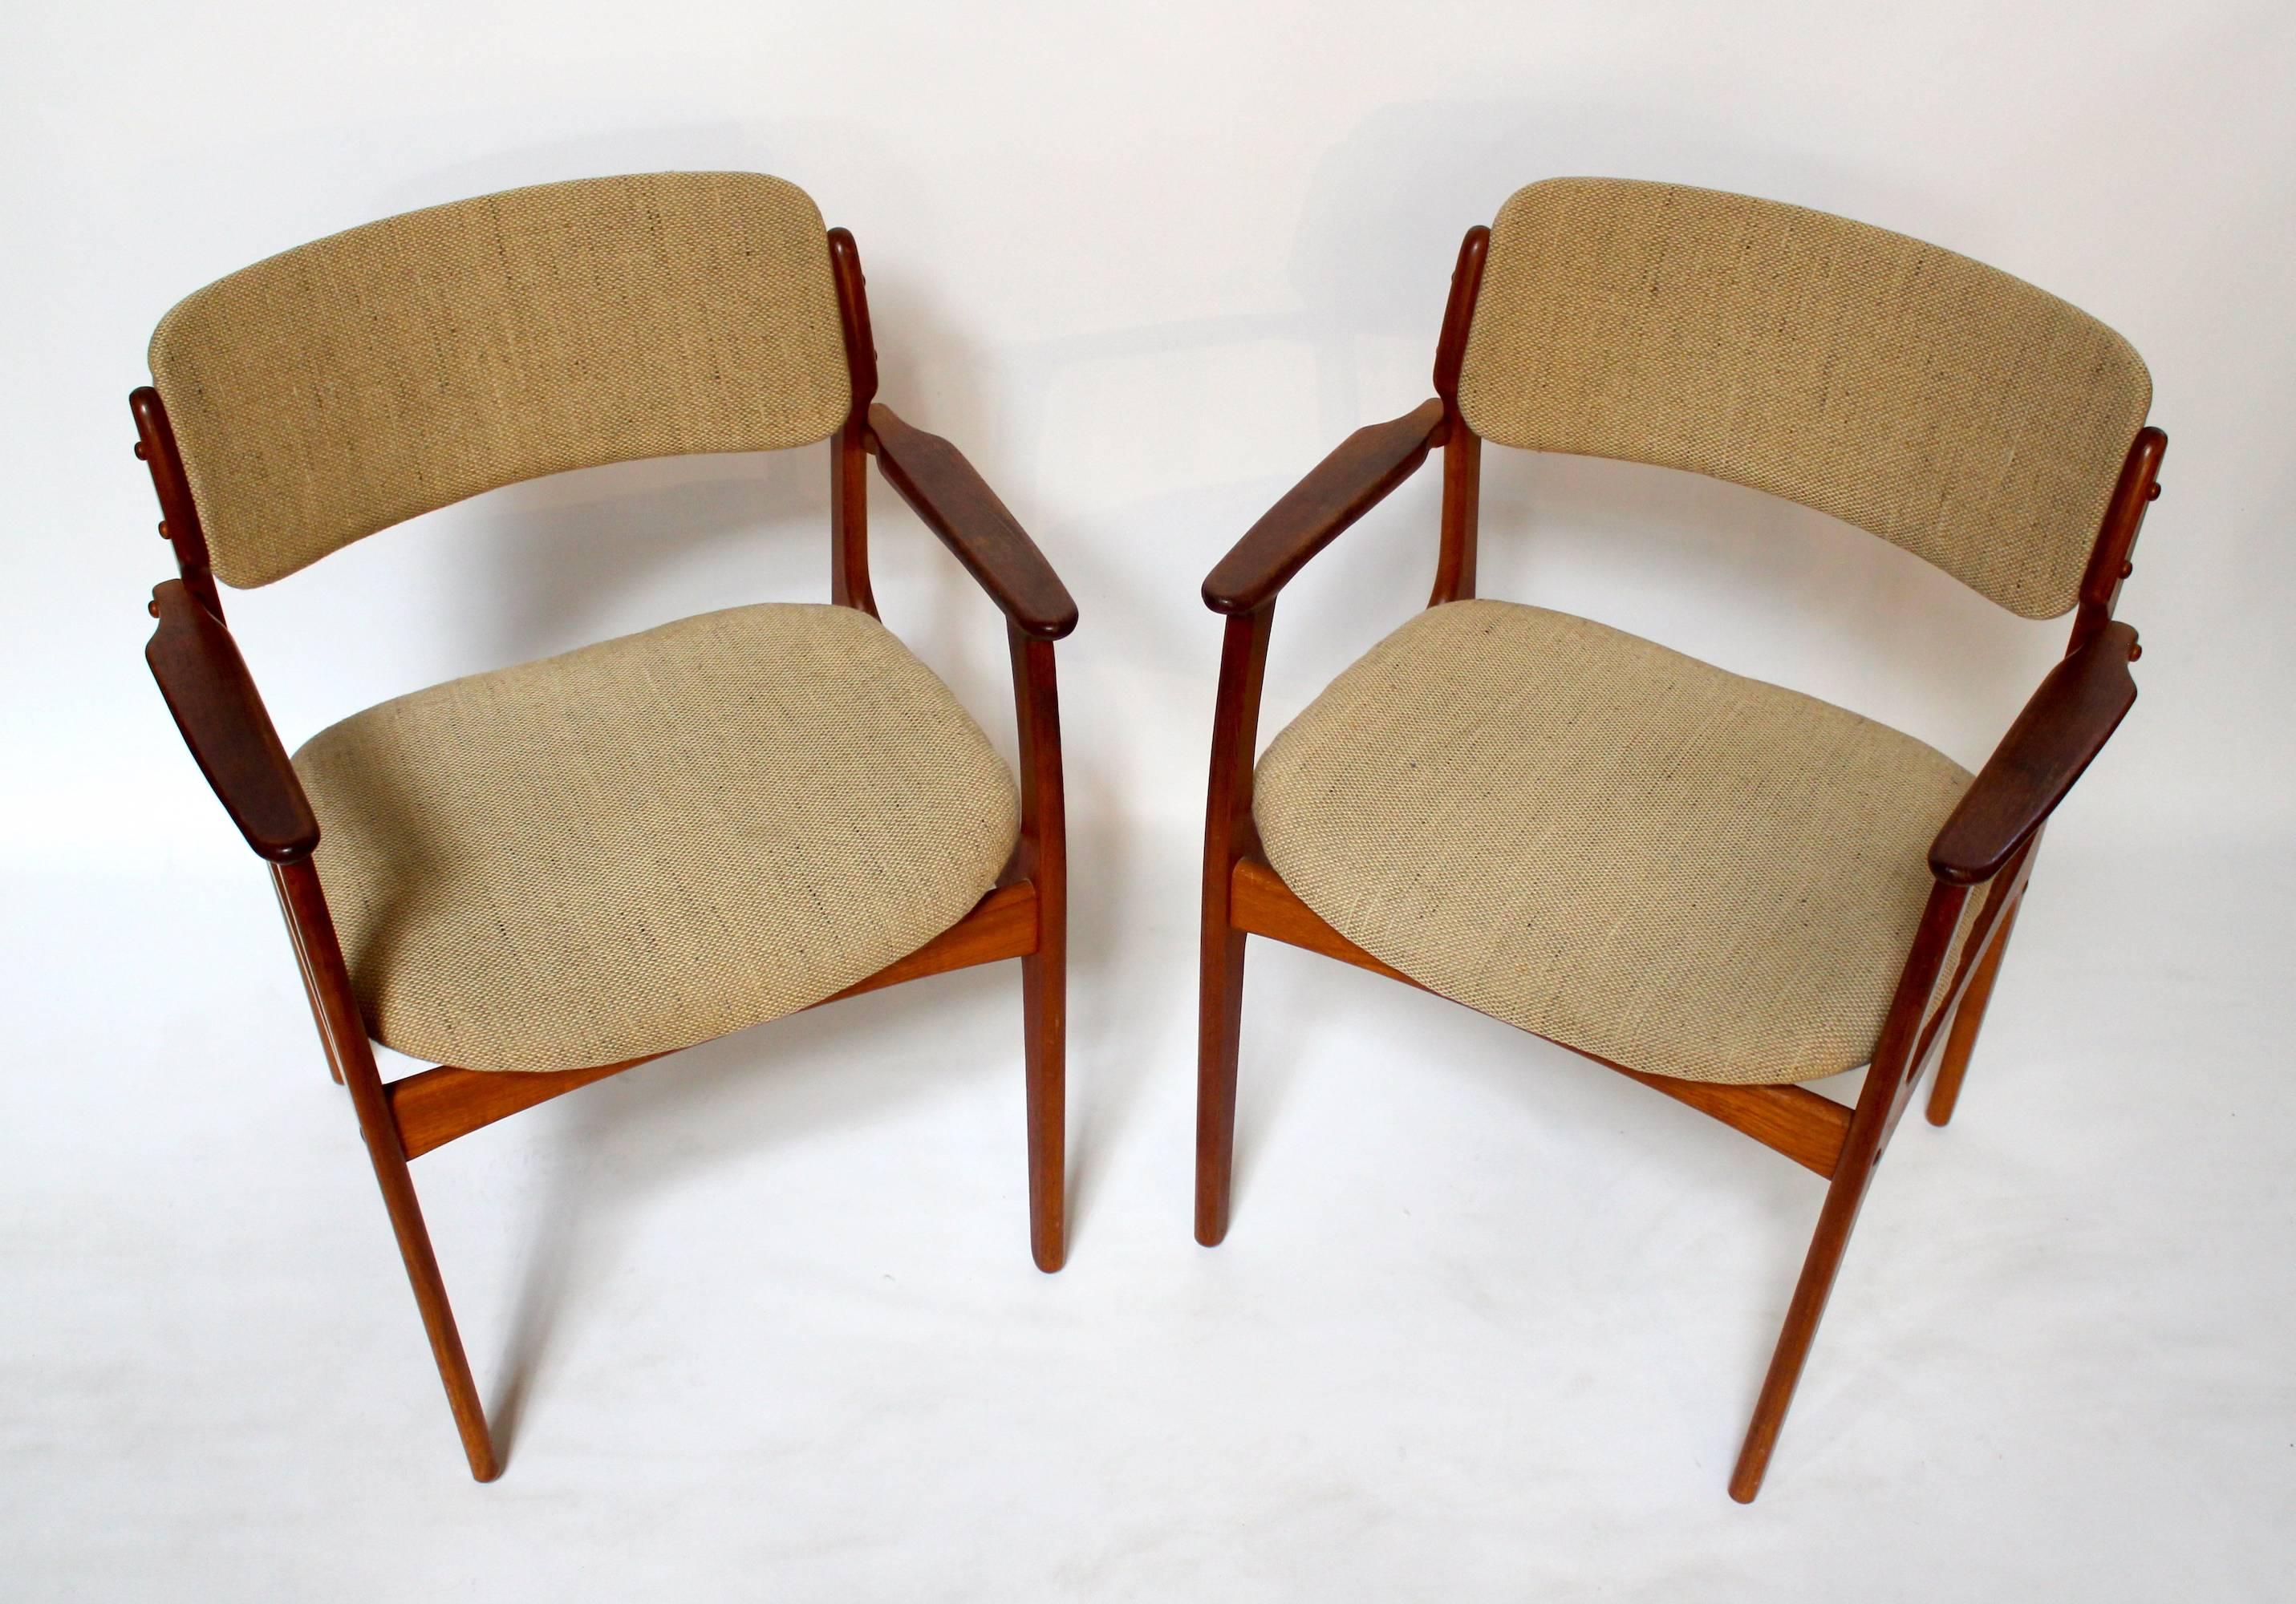 Pair of Danish modern OD-49 teak armchairs by Erik Buch for Oddense Maskinsinedkeri. Chairs have original upholstery and foam. In good condition with no fading or tears, though the seat backs have very little padding. Price is for the pair.